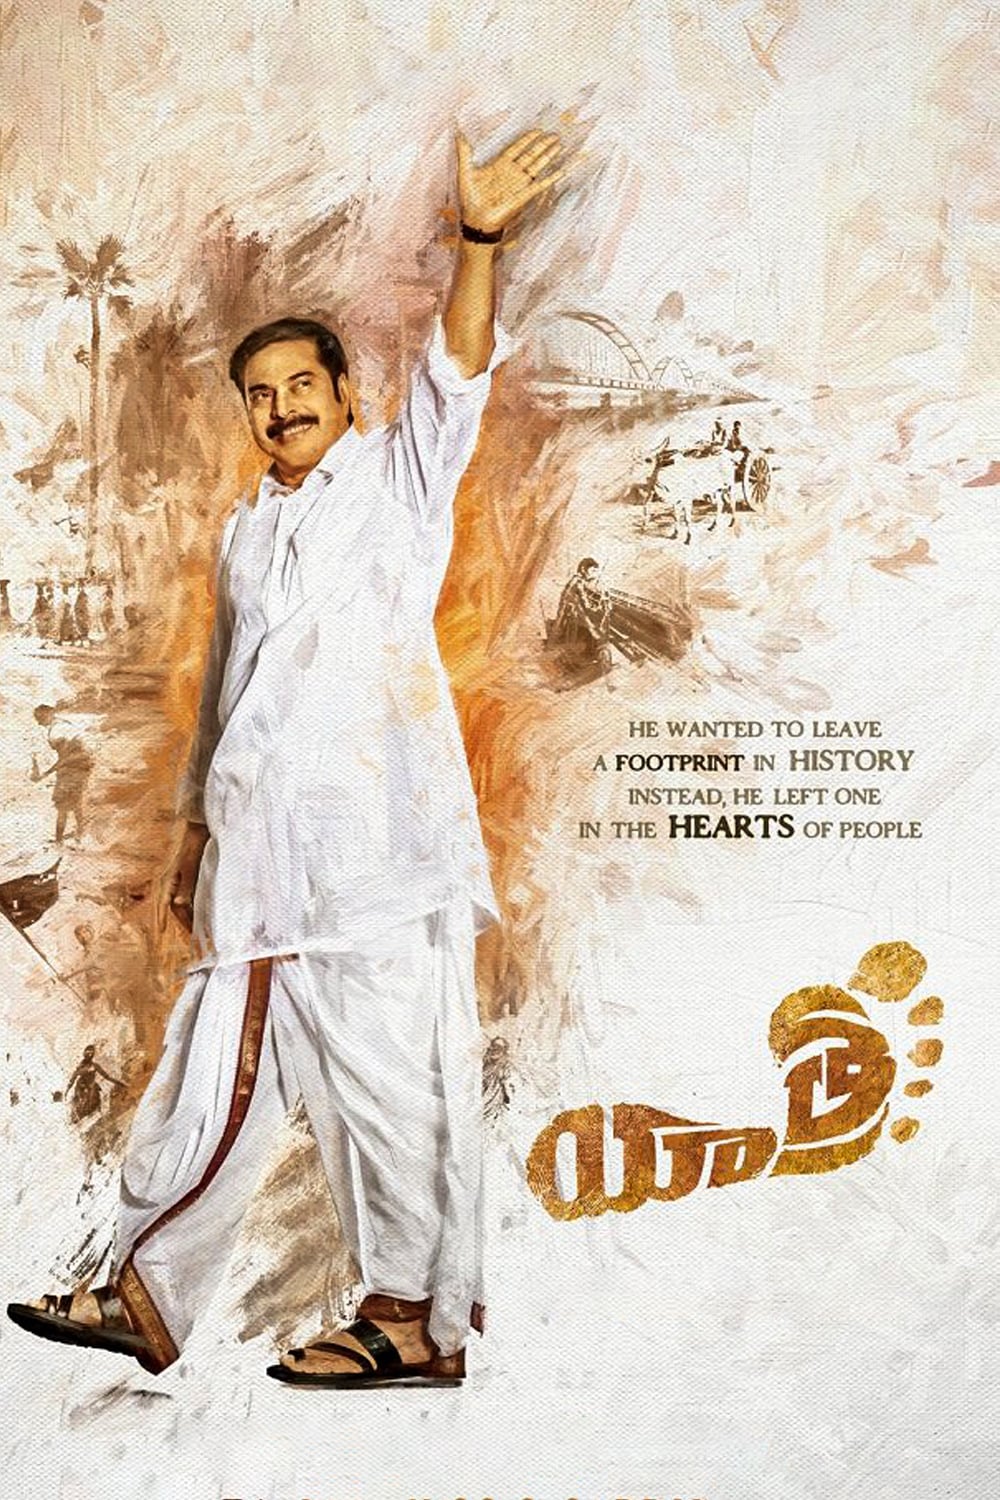 Poster for the movie "Yatra"